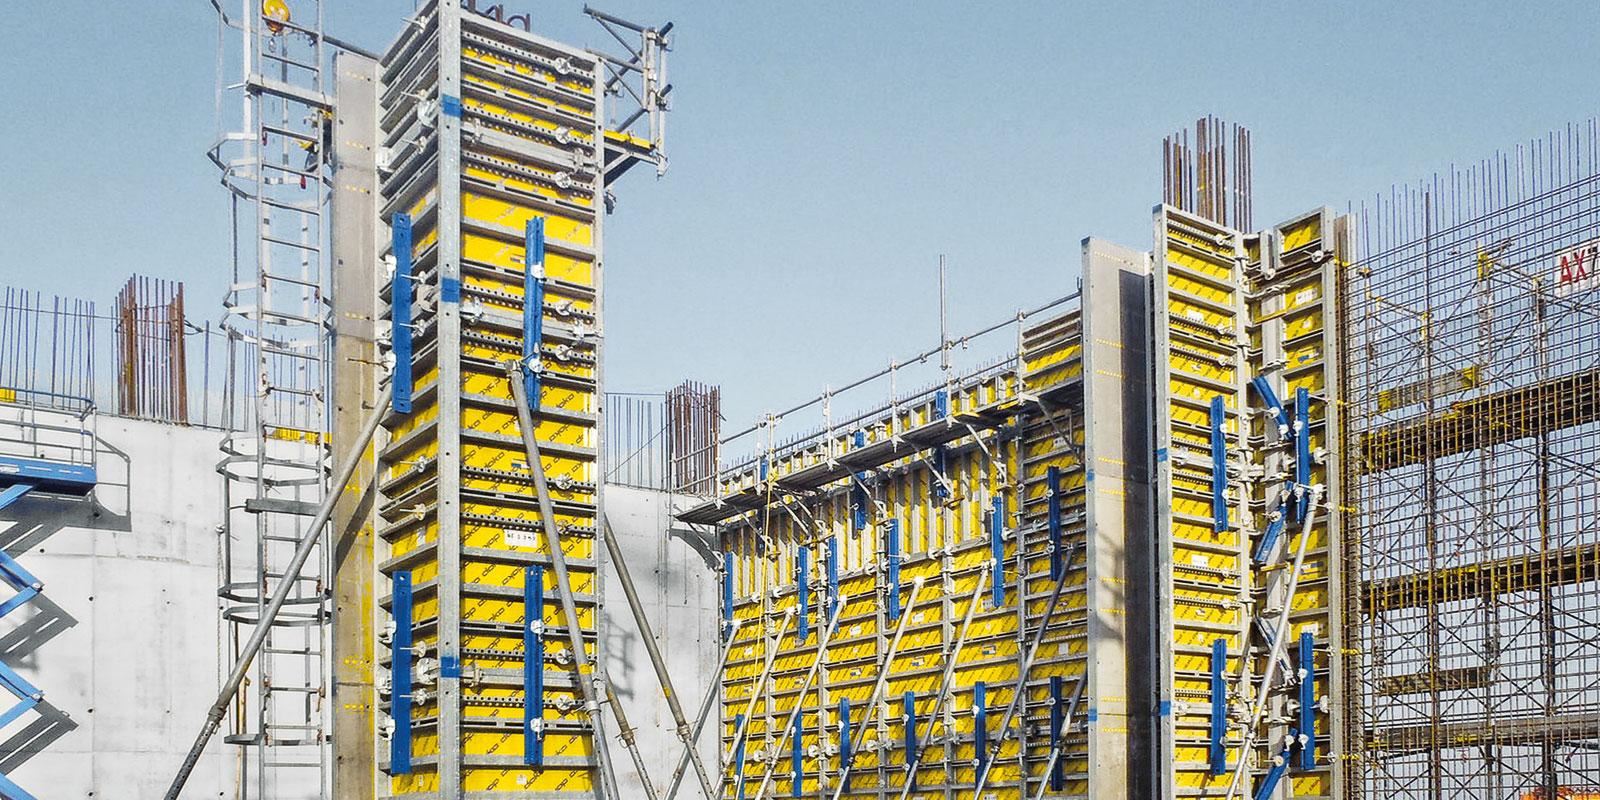 Formwork Safety Operation! Requirements on Formwork System